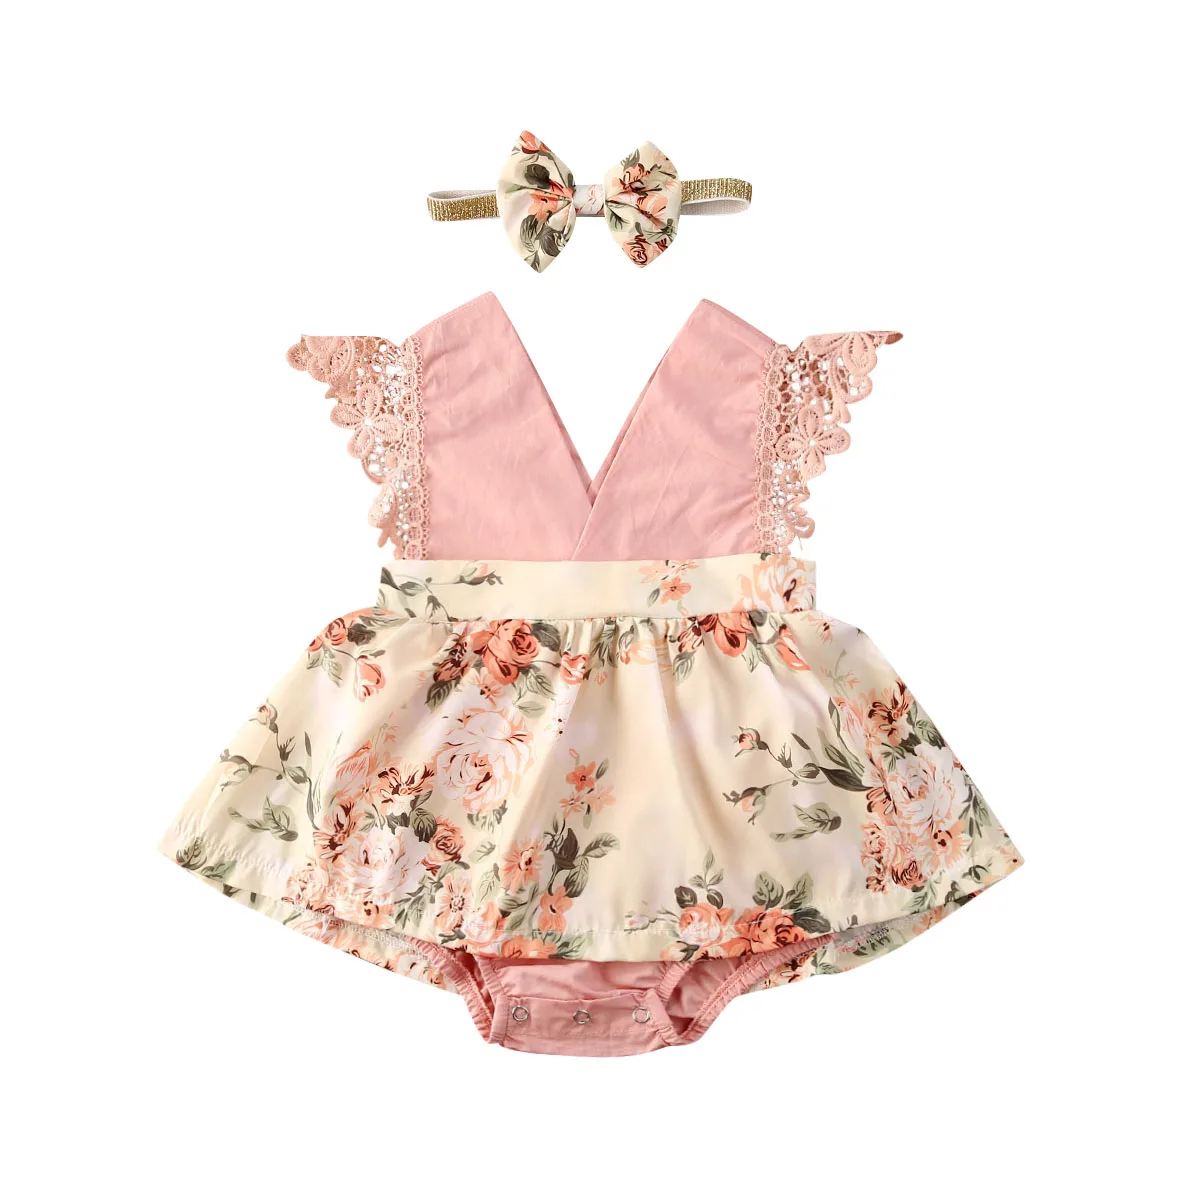 

2Pcs Newborn Baby Girl Clothes Lace Ruffle Sunflower Print Romper Headband Set Summer Sleeveless Outfits Sunsuit for 0-24 Months